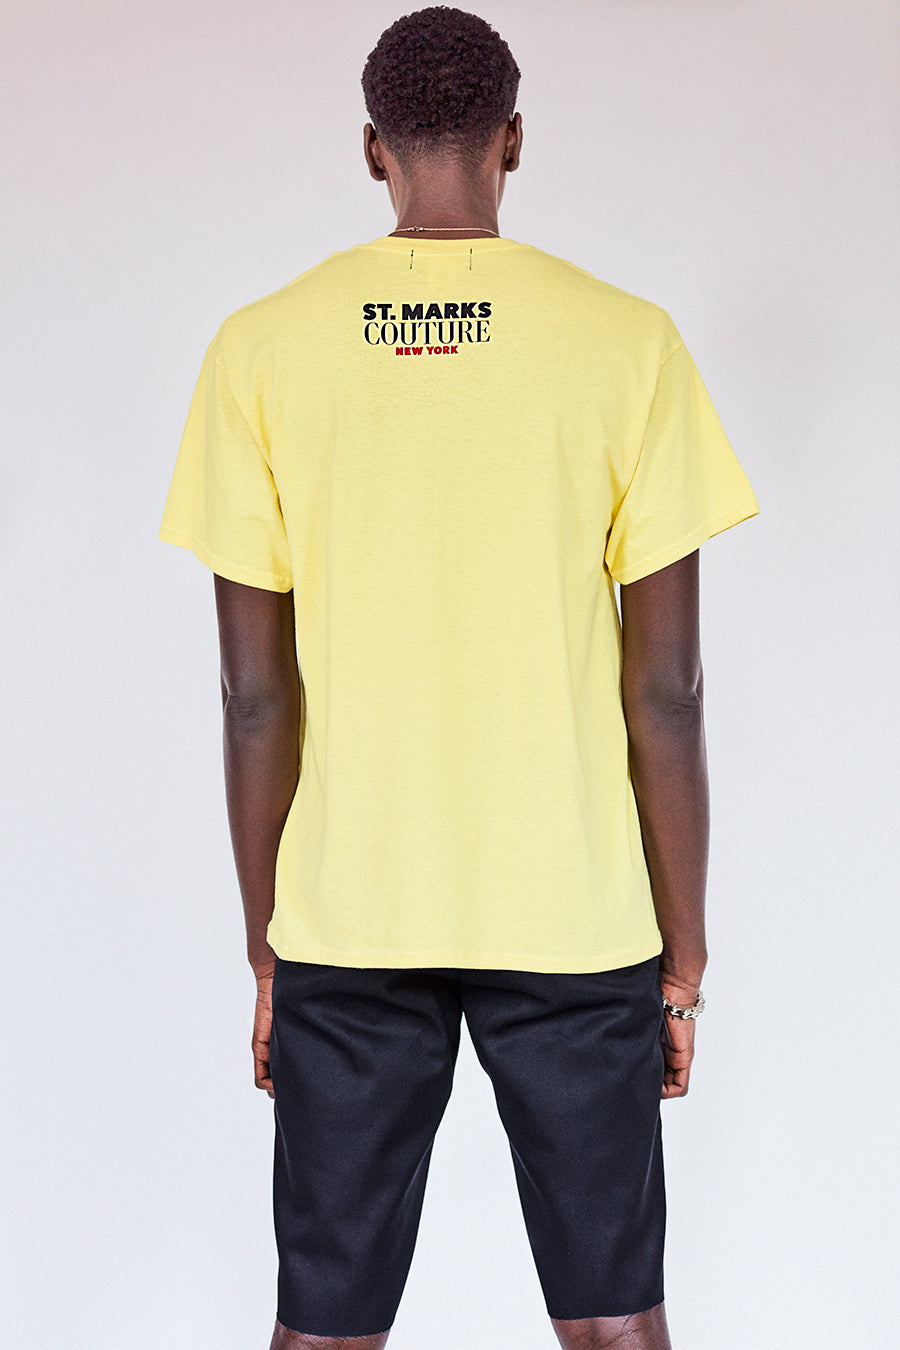 Brand New. Pride Month 2020- New York Label: Your new work from home outfit Shop the Dont Walk Vogue pale yellow T-Shirt featuring chest embroidery inspired by old school Walk/Dont Walk crosswalk signs on the front and St. Marks Couture New York logo on the back. Hand silkscreen printed in New York with love.